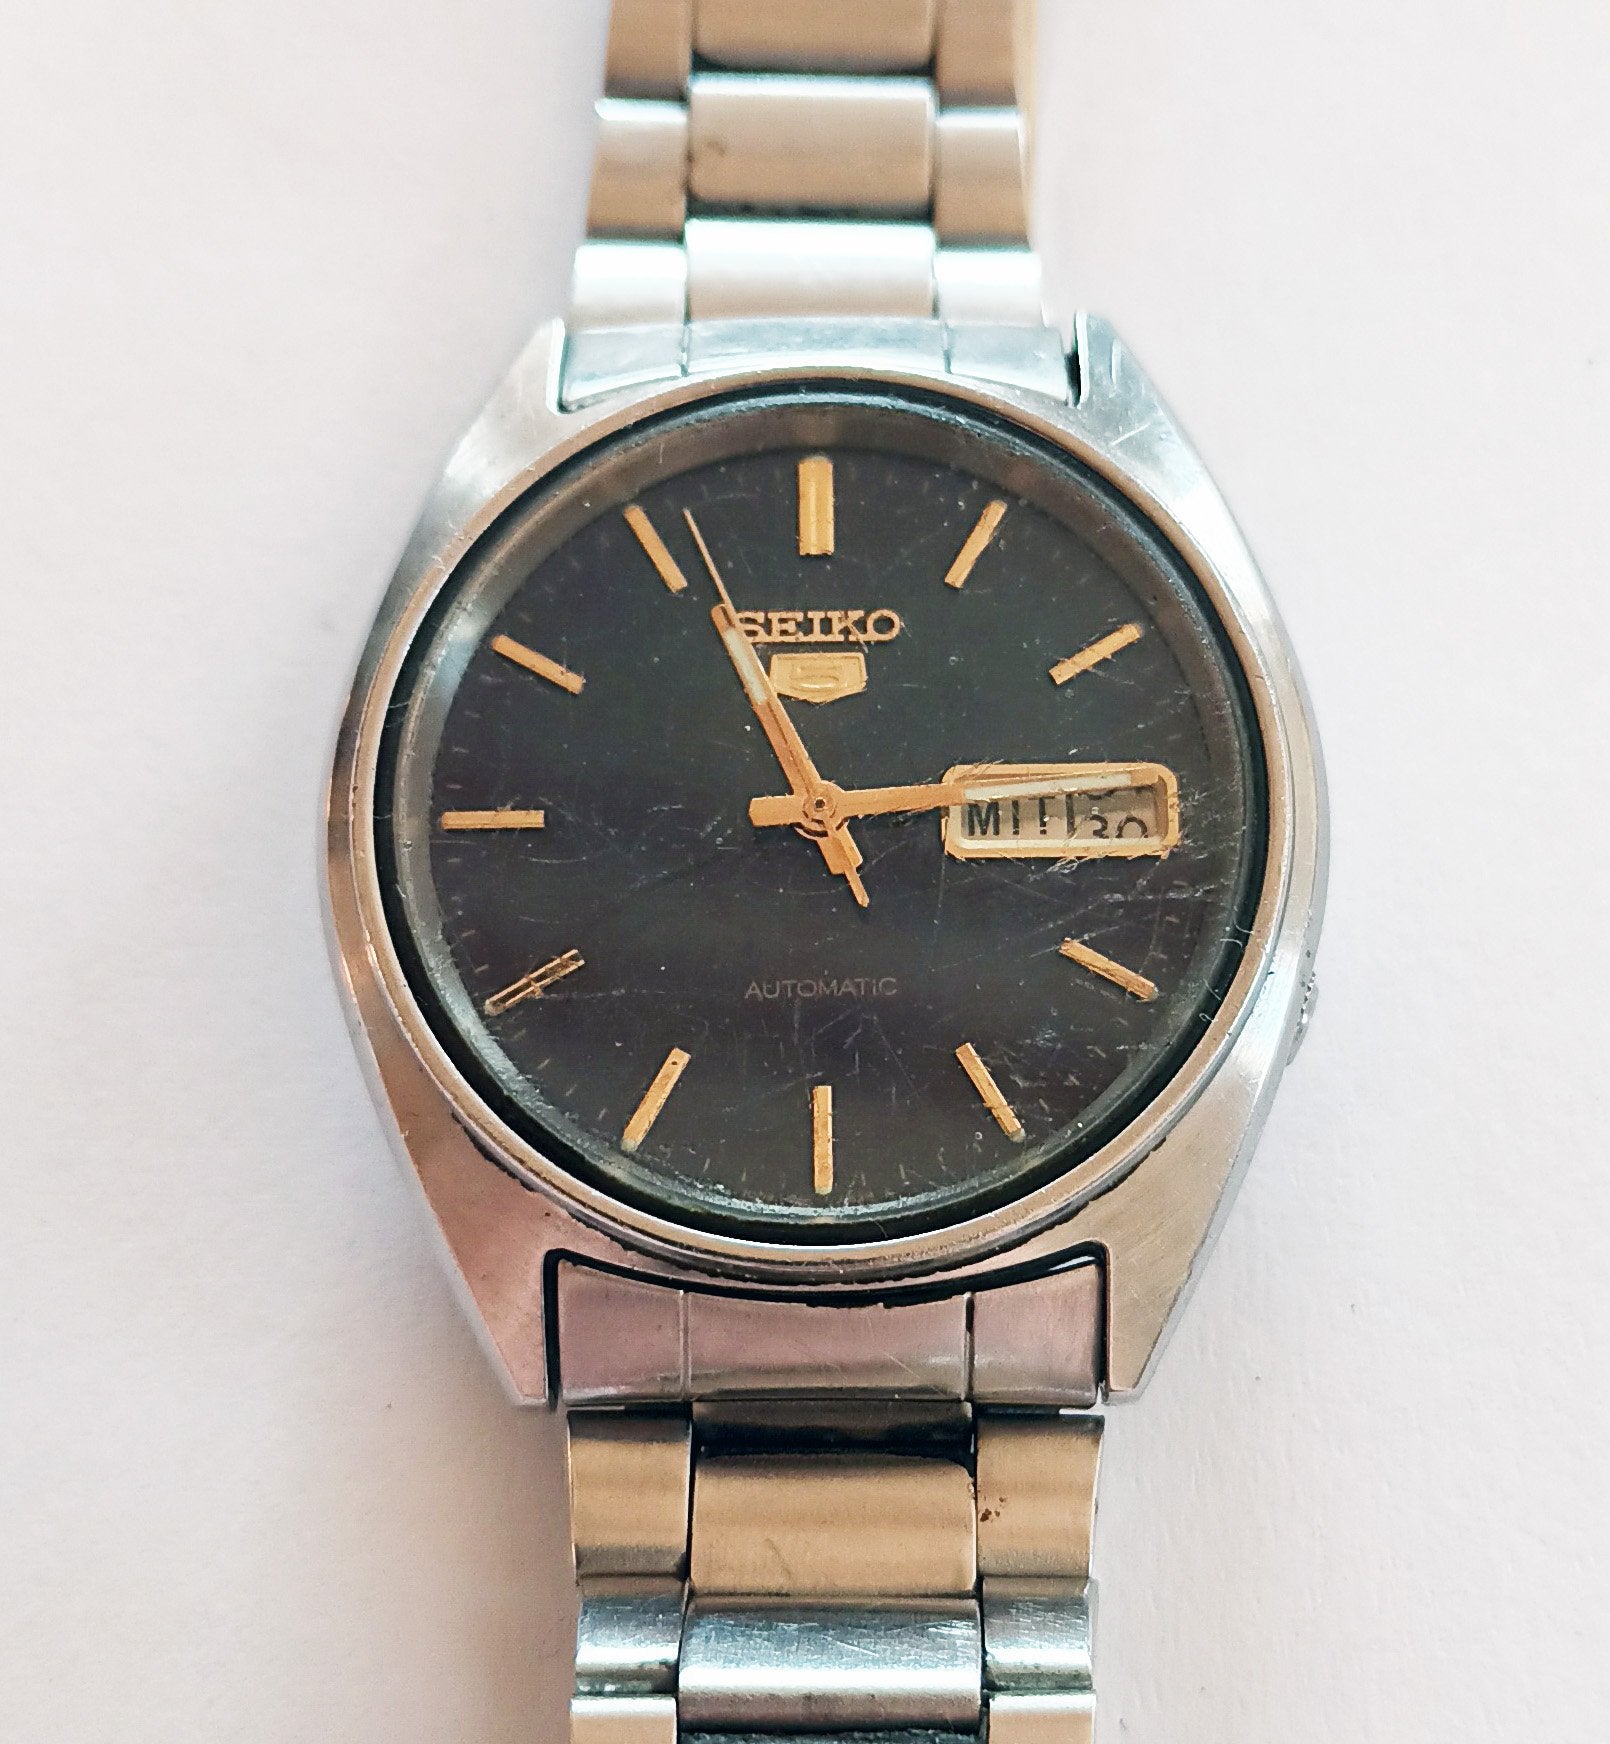 Countryside Grand rille Old Seiko 5 - is it worth servicing? | WatchUSeek Watch Forums